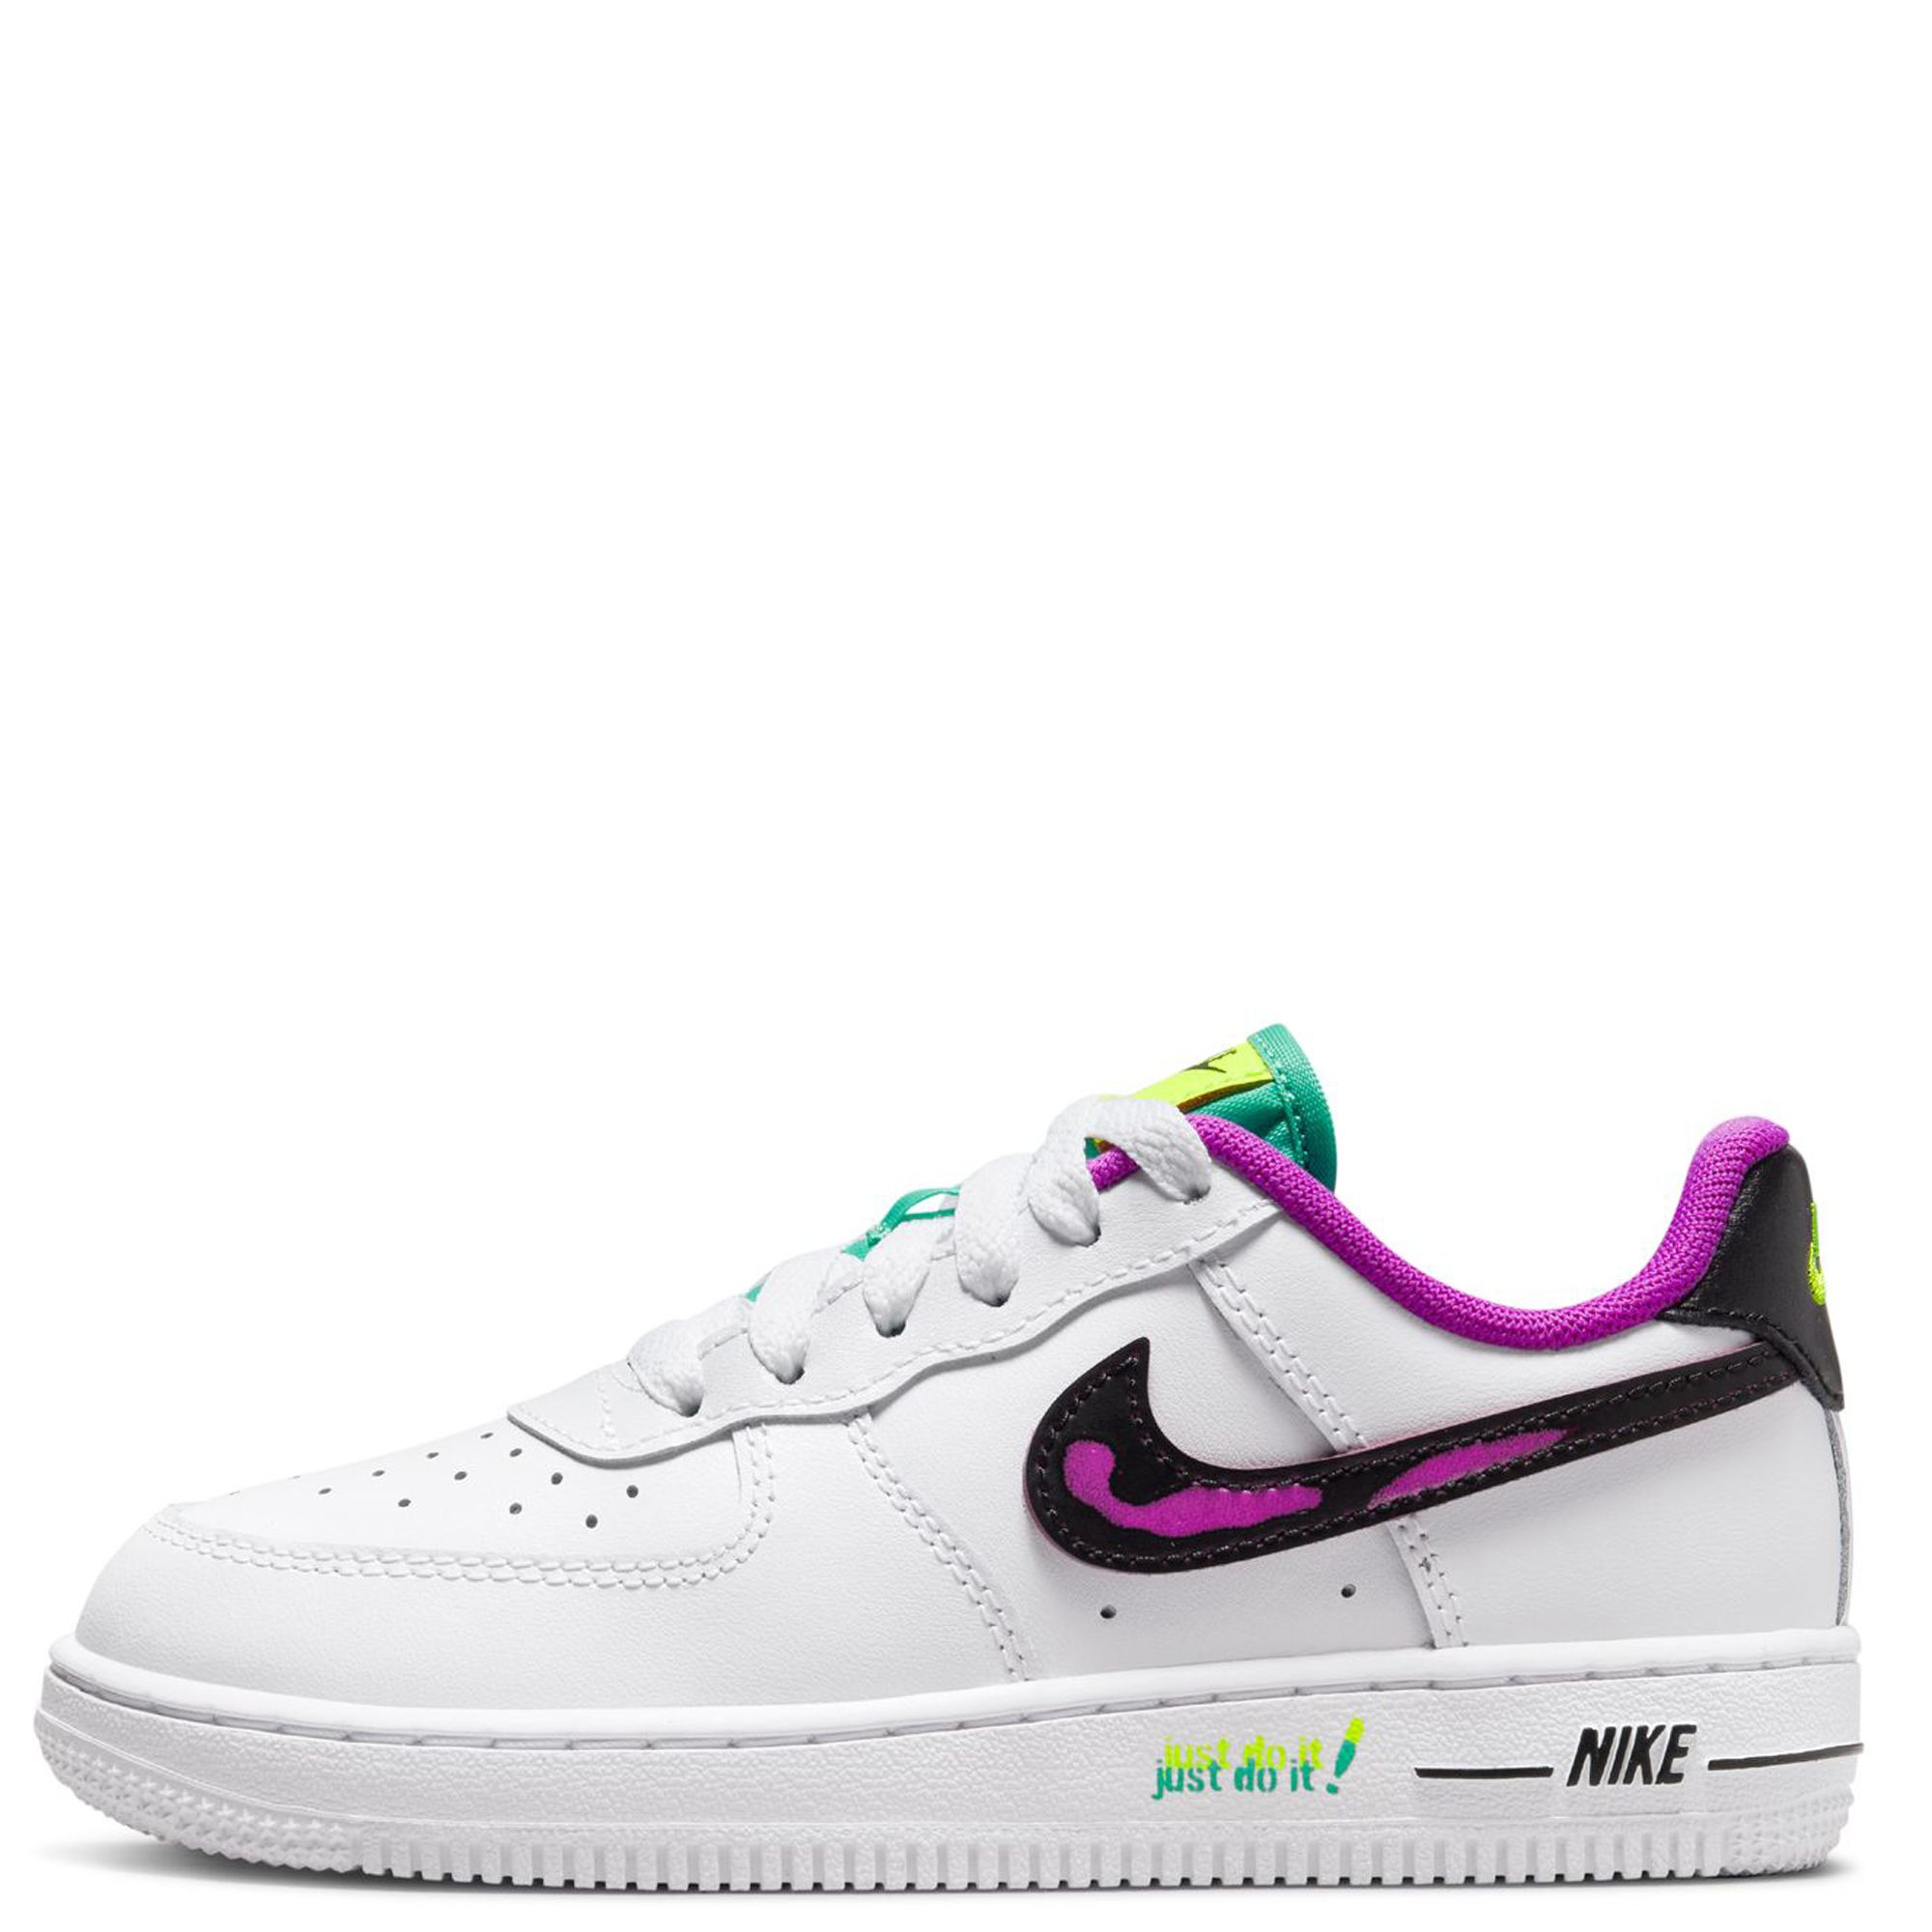 Nike Air Force 1 LV8 3 (PS) Little Kids Basketball Shoes Size 1.5